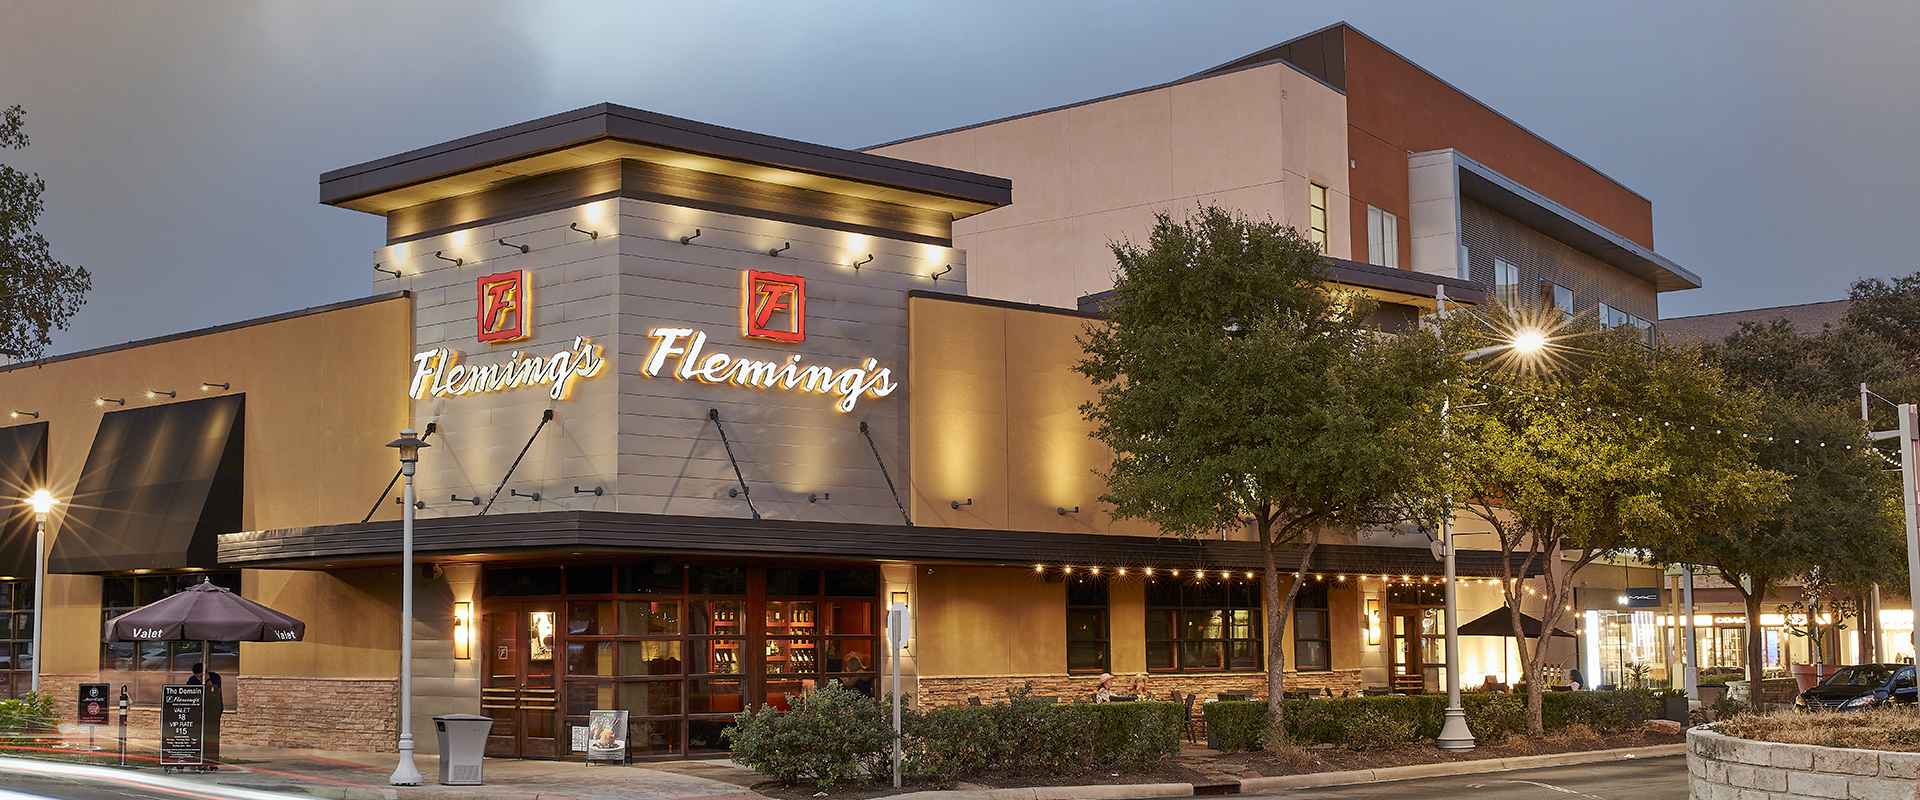 About The Domain® - A Shopping Center in Austin, TX - A Simon Property